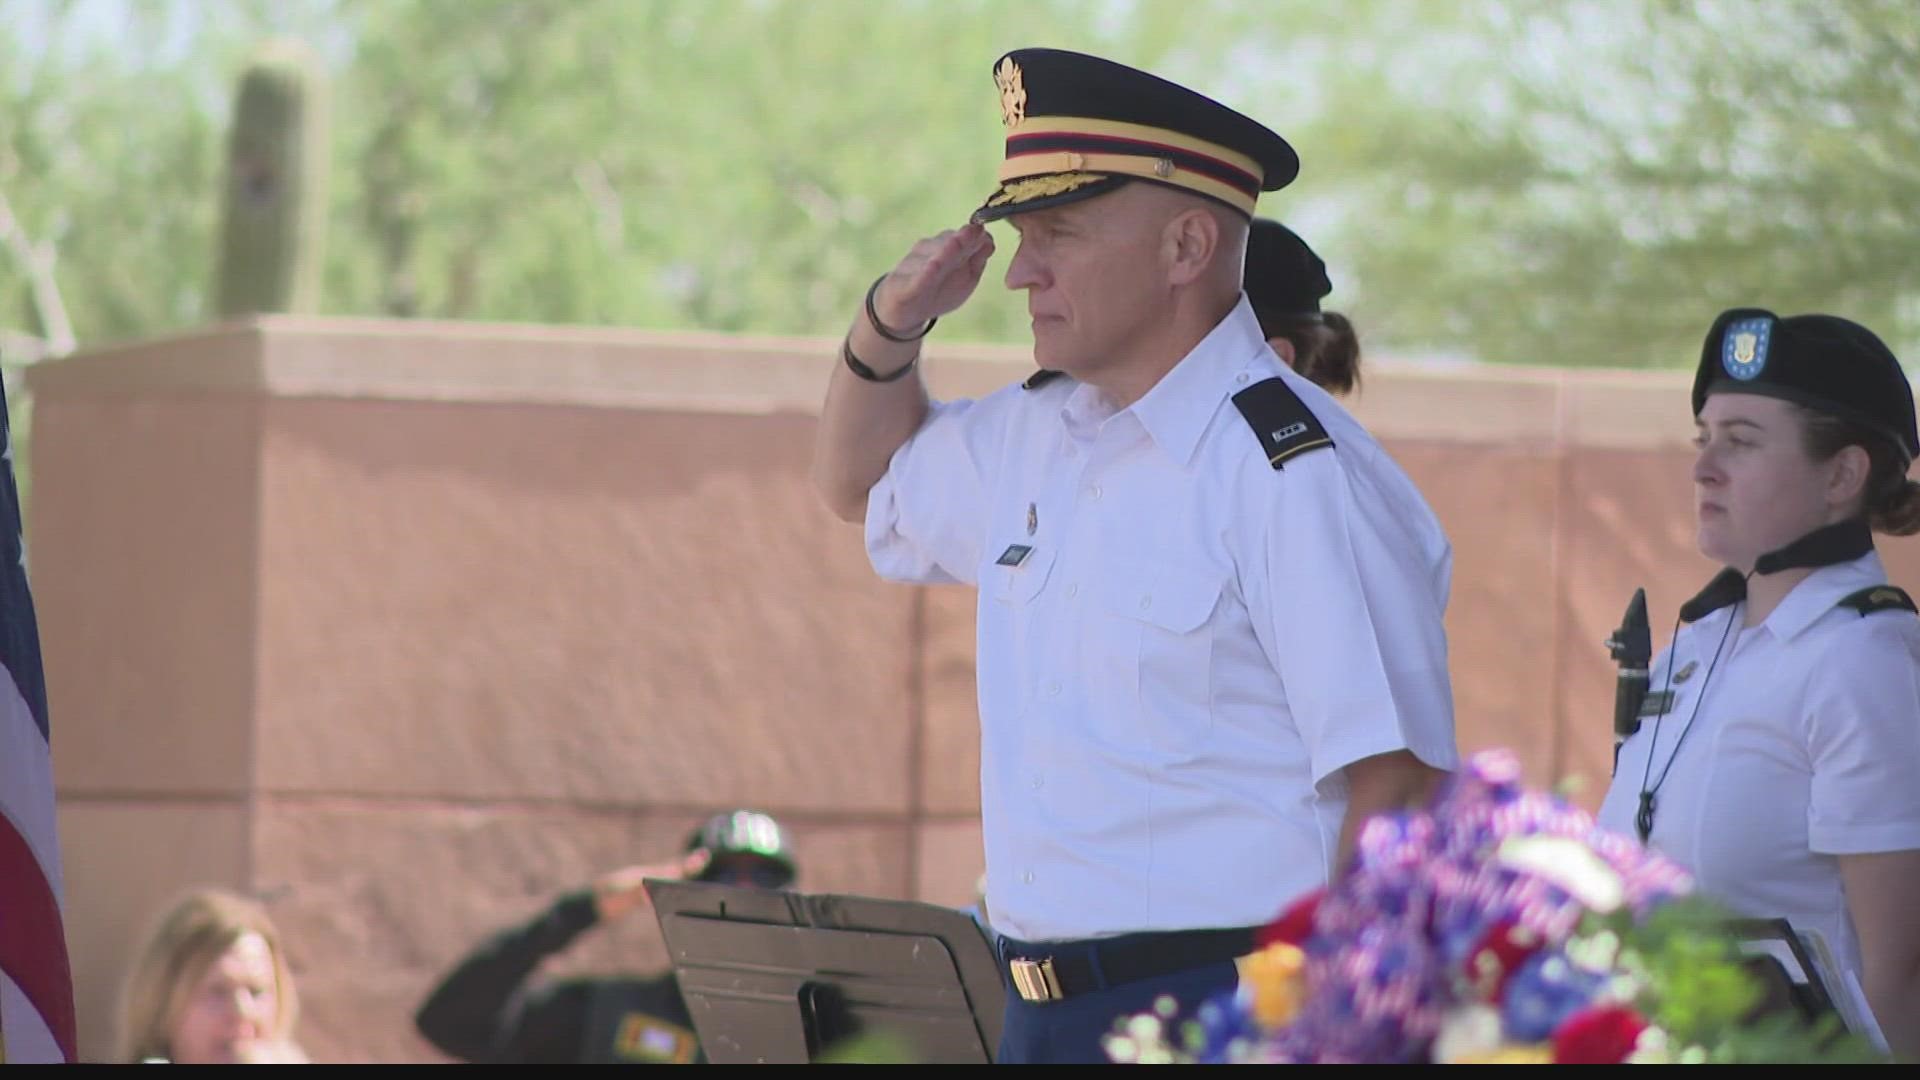 A Memorial Day ceremony was held at the National Memorial Cemetery. Wreath presentations, color guards and music from the Army National Guard Band were on display.